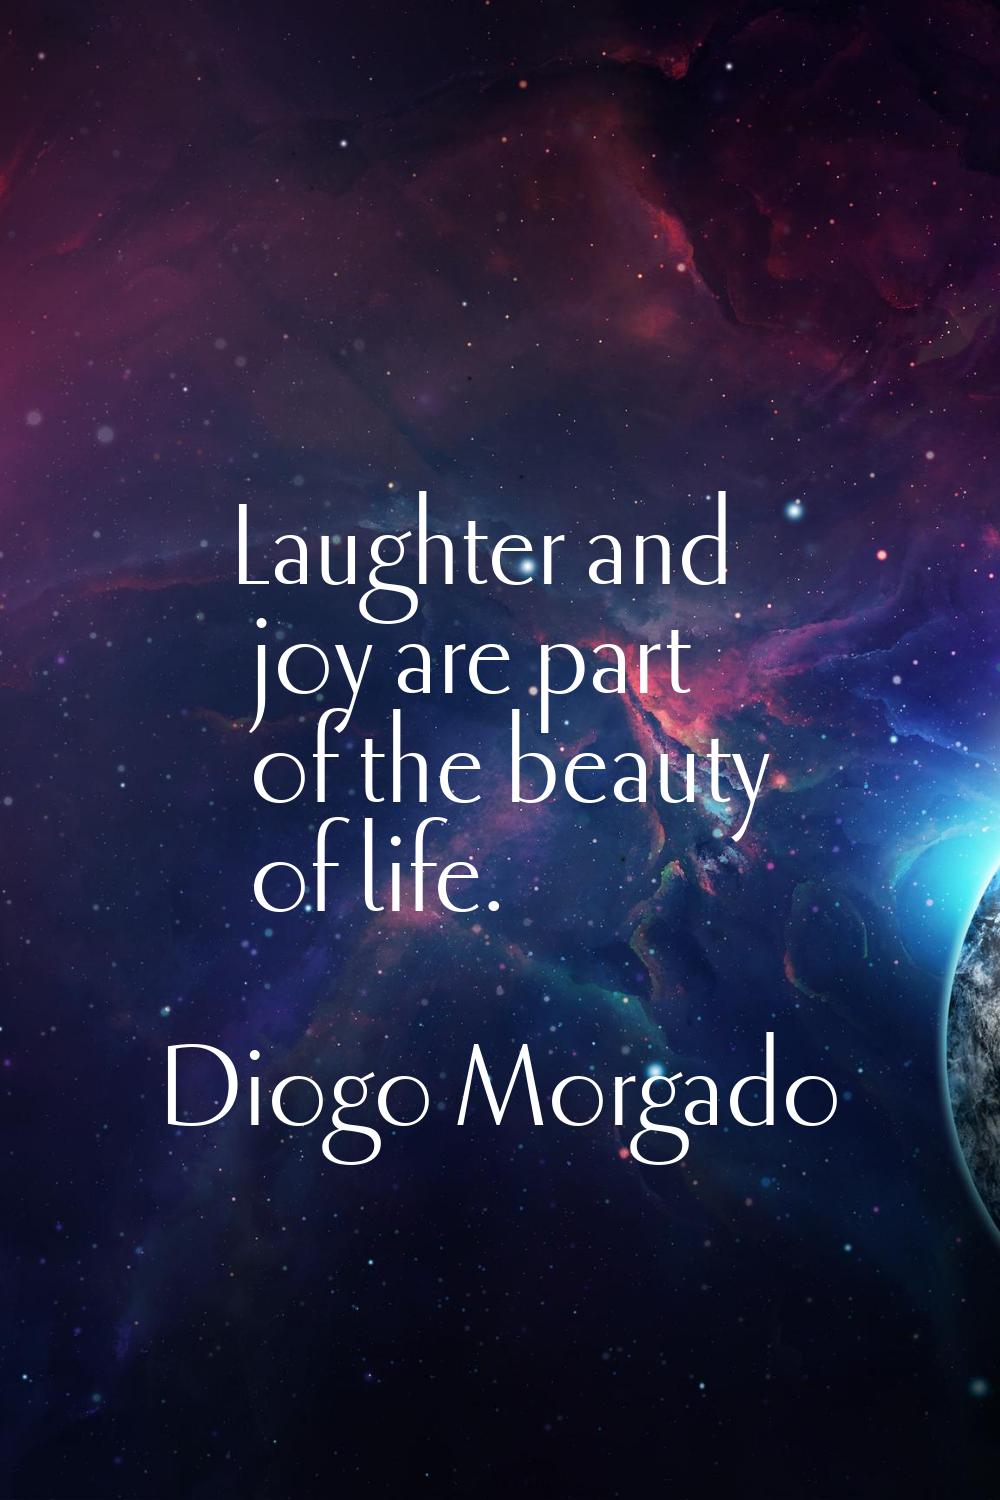 Laughter and joy are part of the beauty of life.